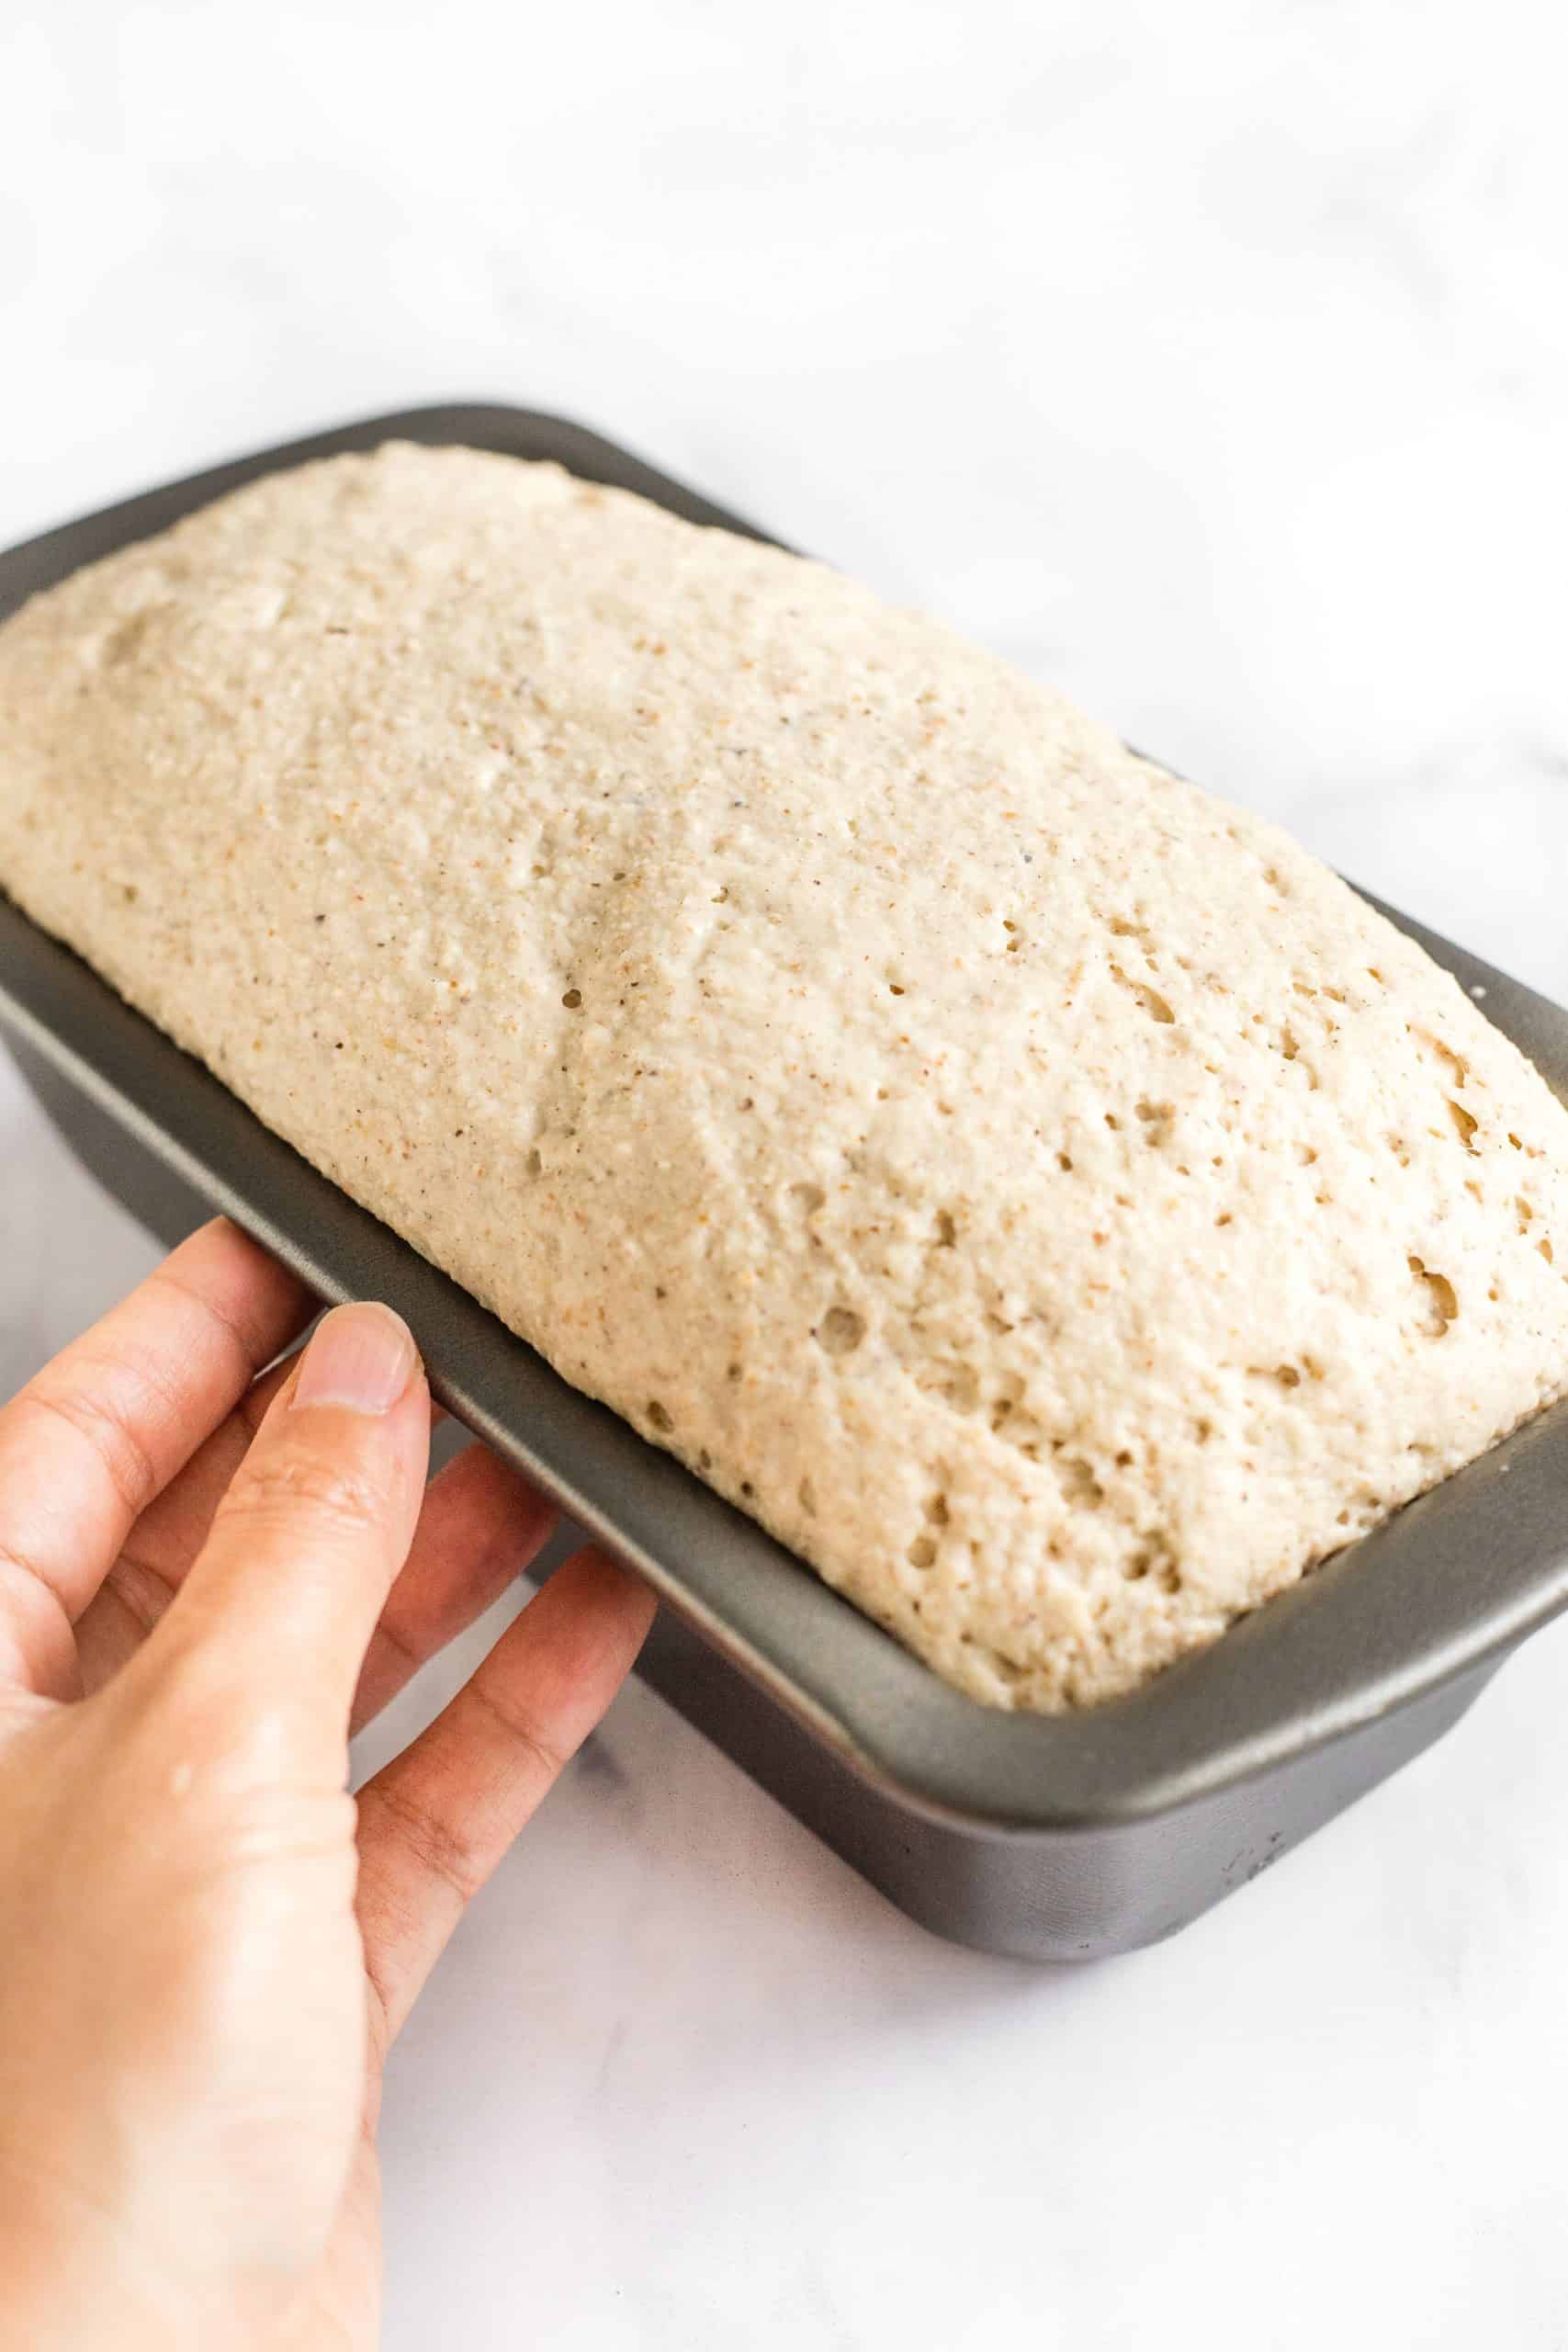 Holding a pan with unbaked bread dough.